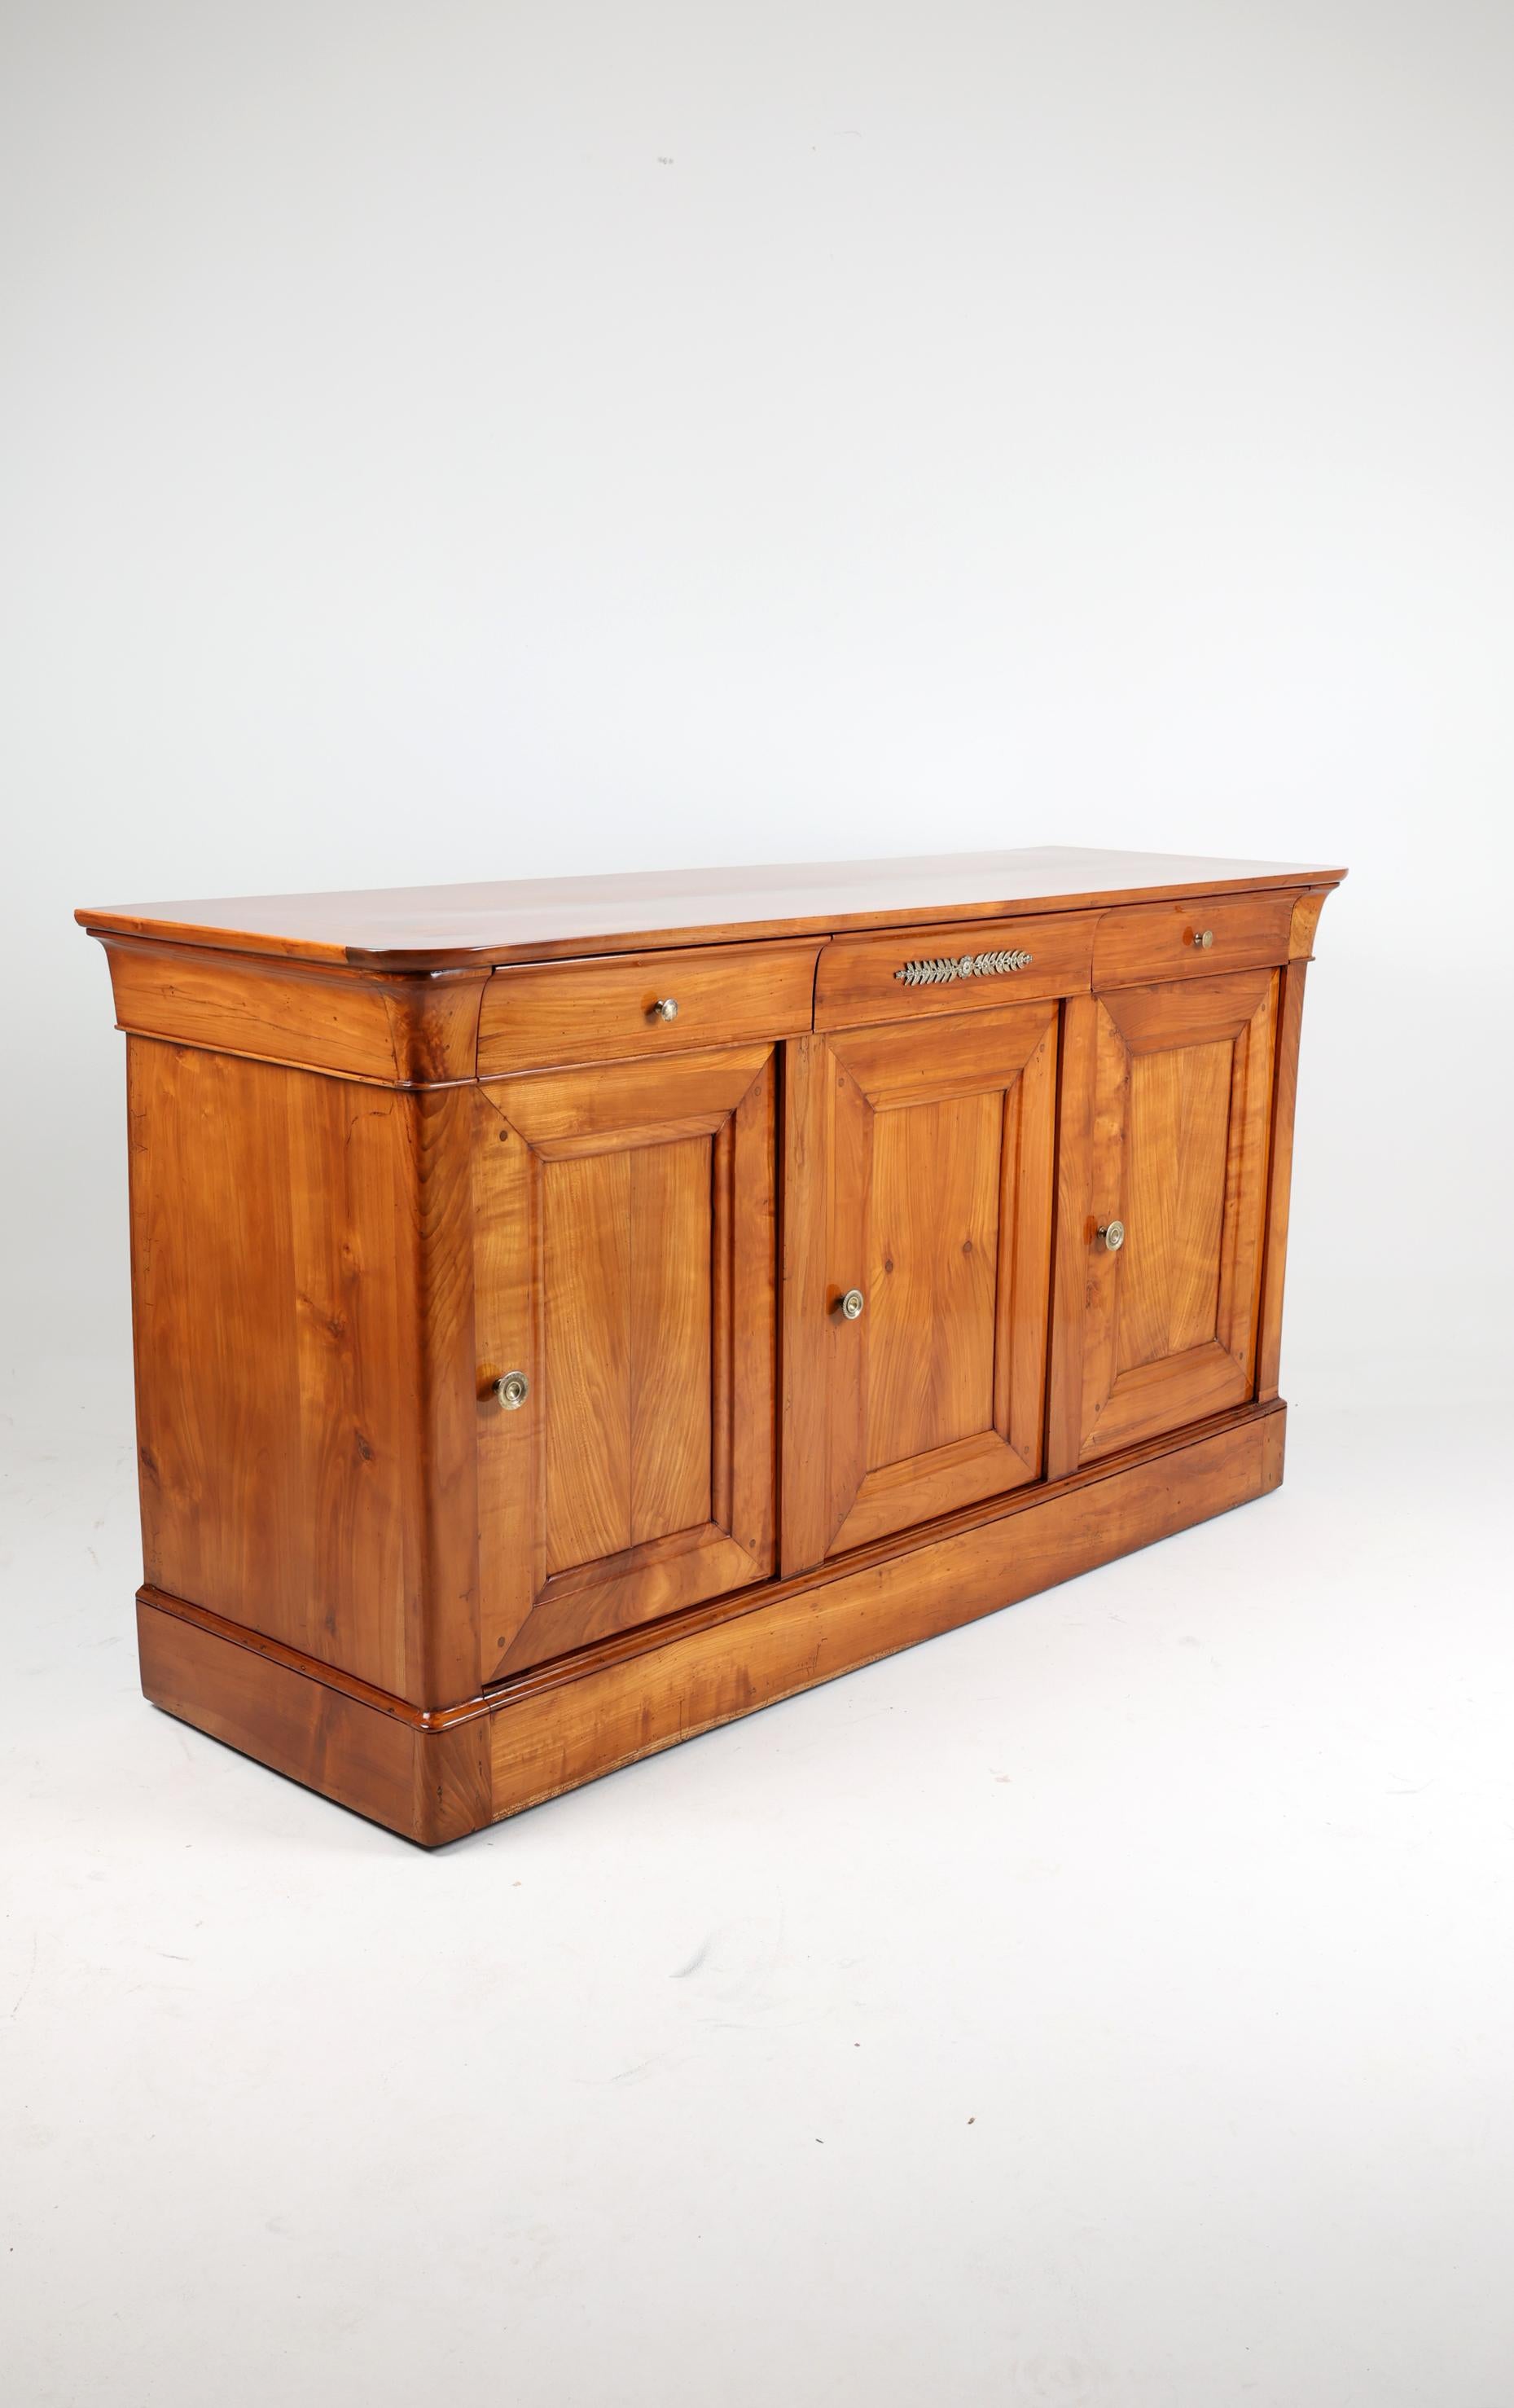 Polished 19th Century Empire Period Sideboard or Buffet For Sale